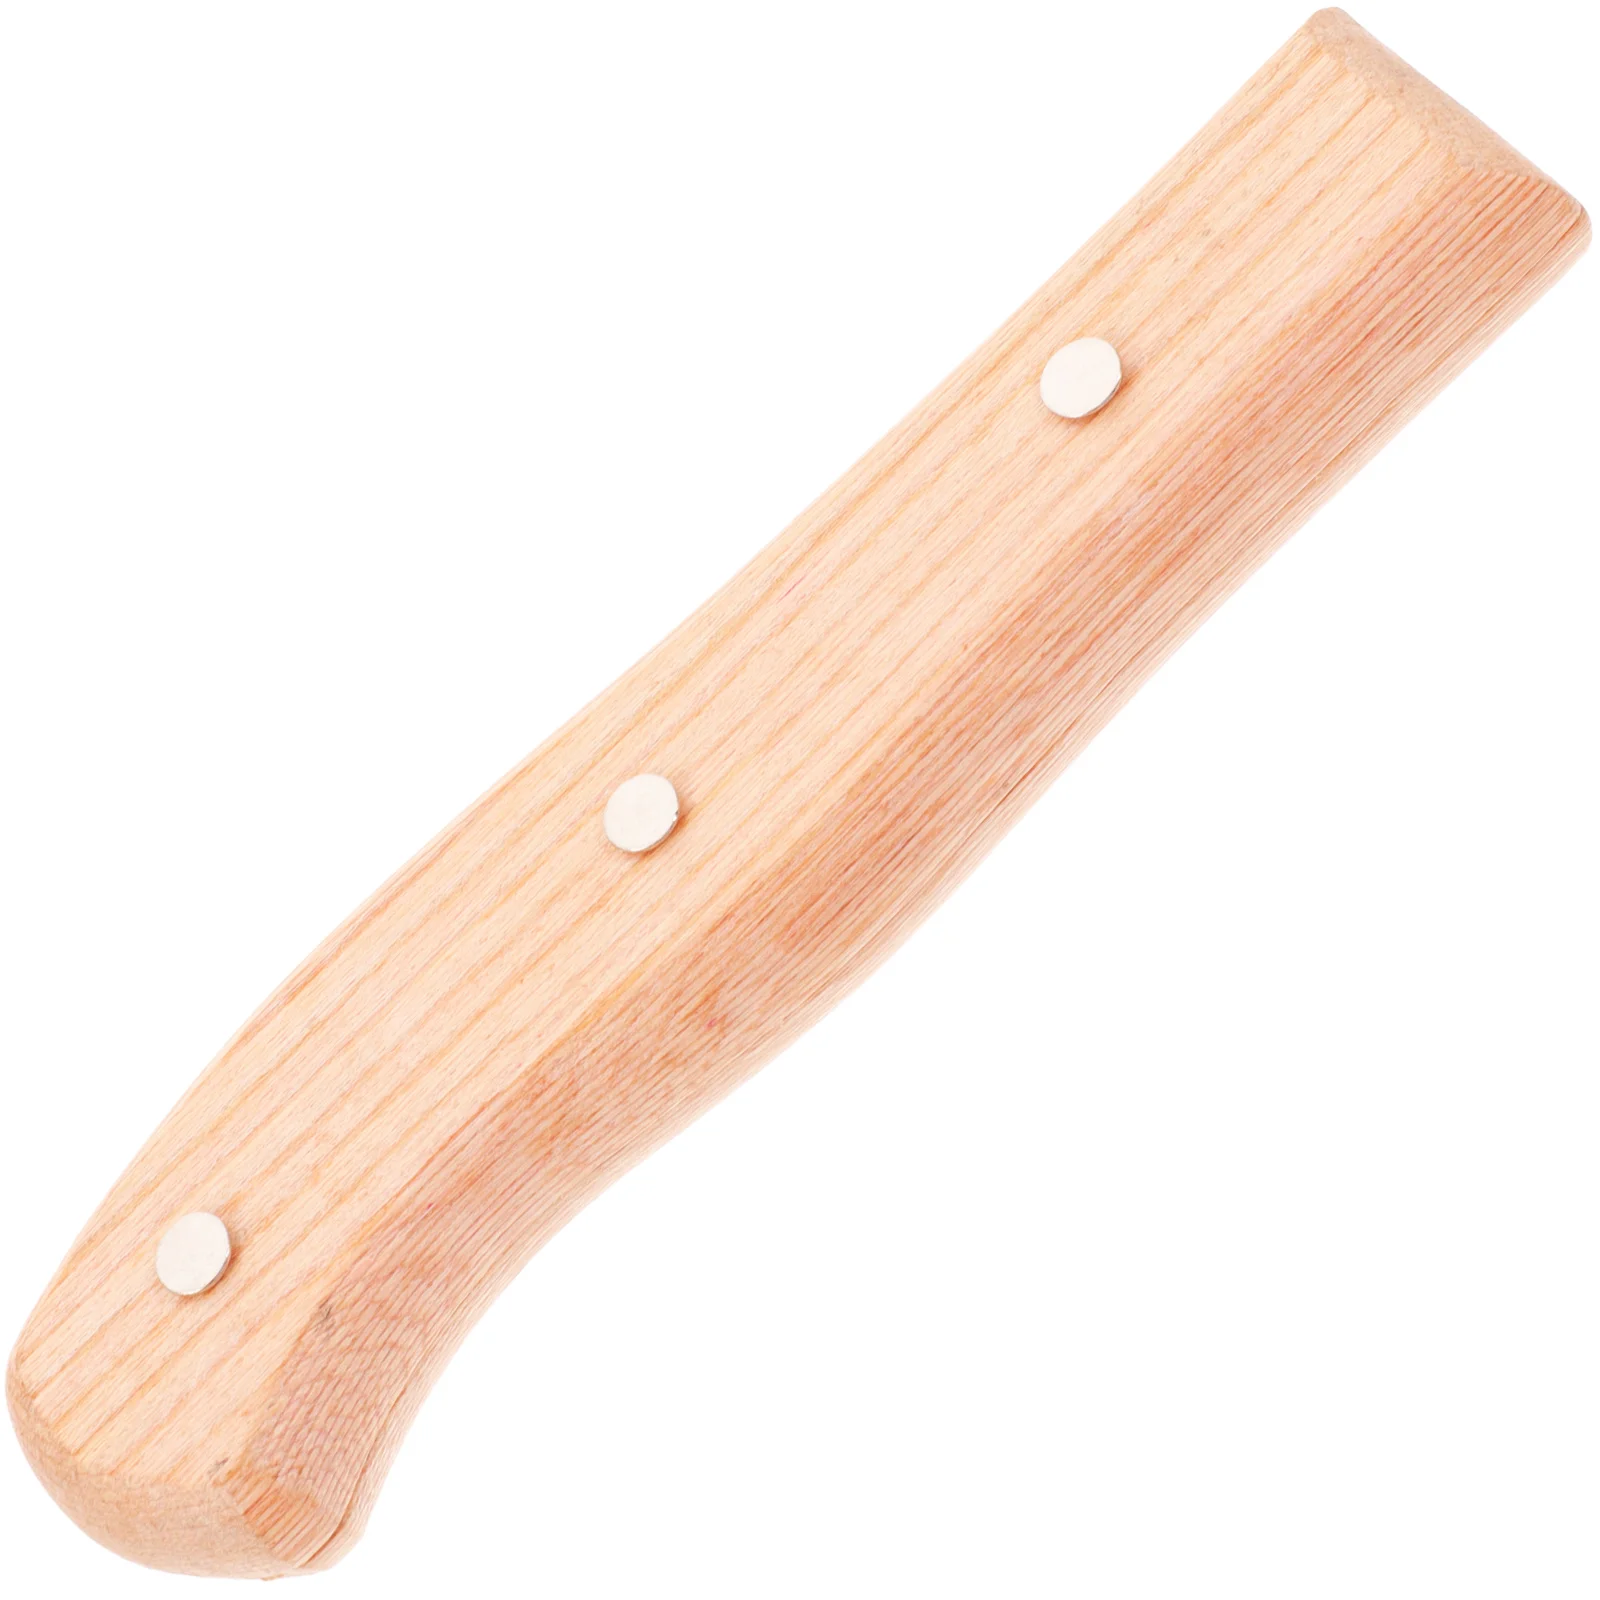 

Grab Handle Replacement Grip Comfortable Chopping Wooden Kitchen Supply Anti-skid Replaceable